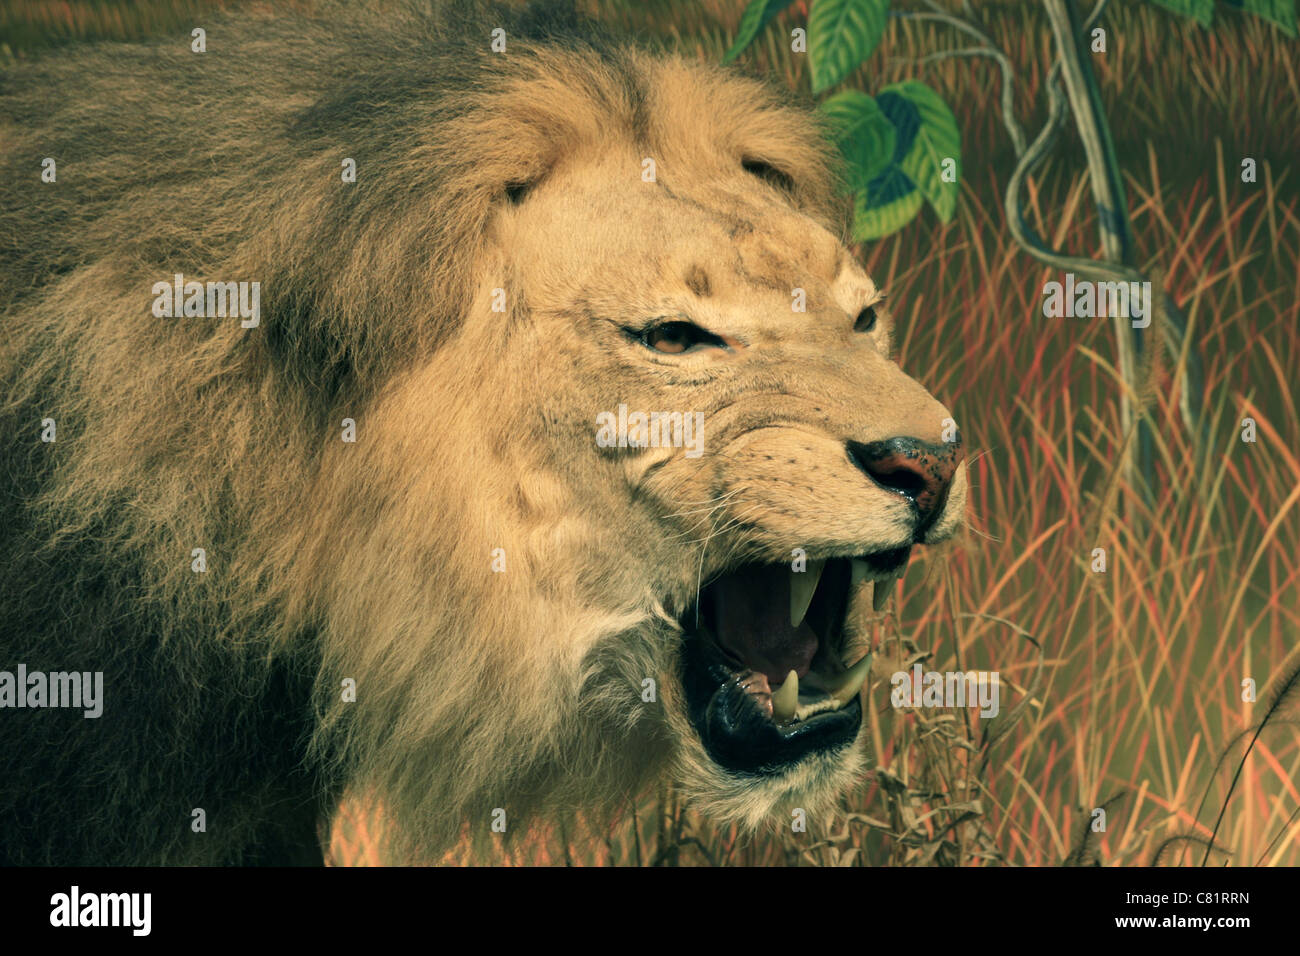 aggressive African lion head with mouth open showing teeth Stock Photo